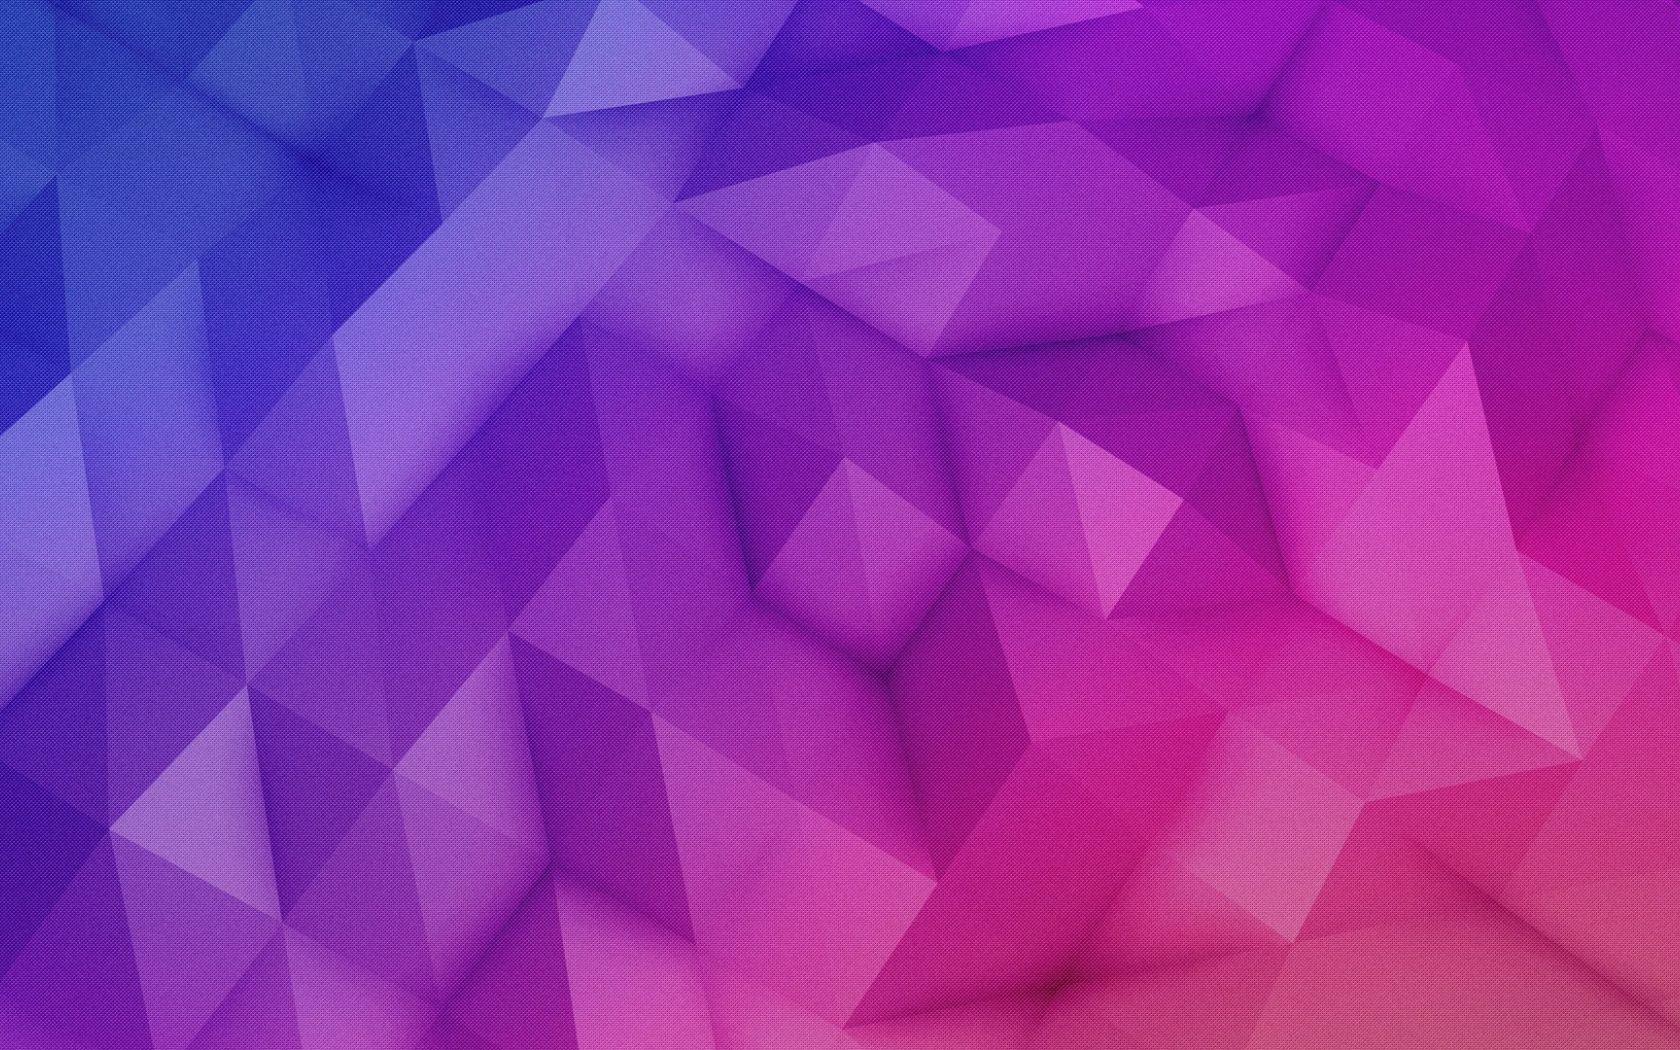 Free download Abstract Geometric 1 1920x1080 wallpaper 1920x1080